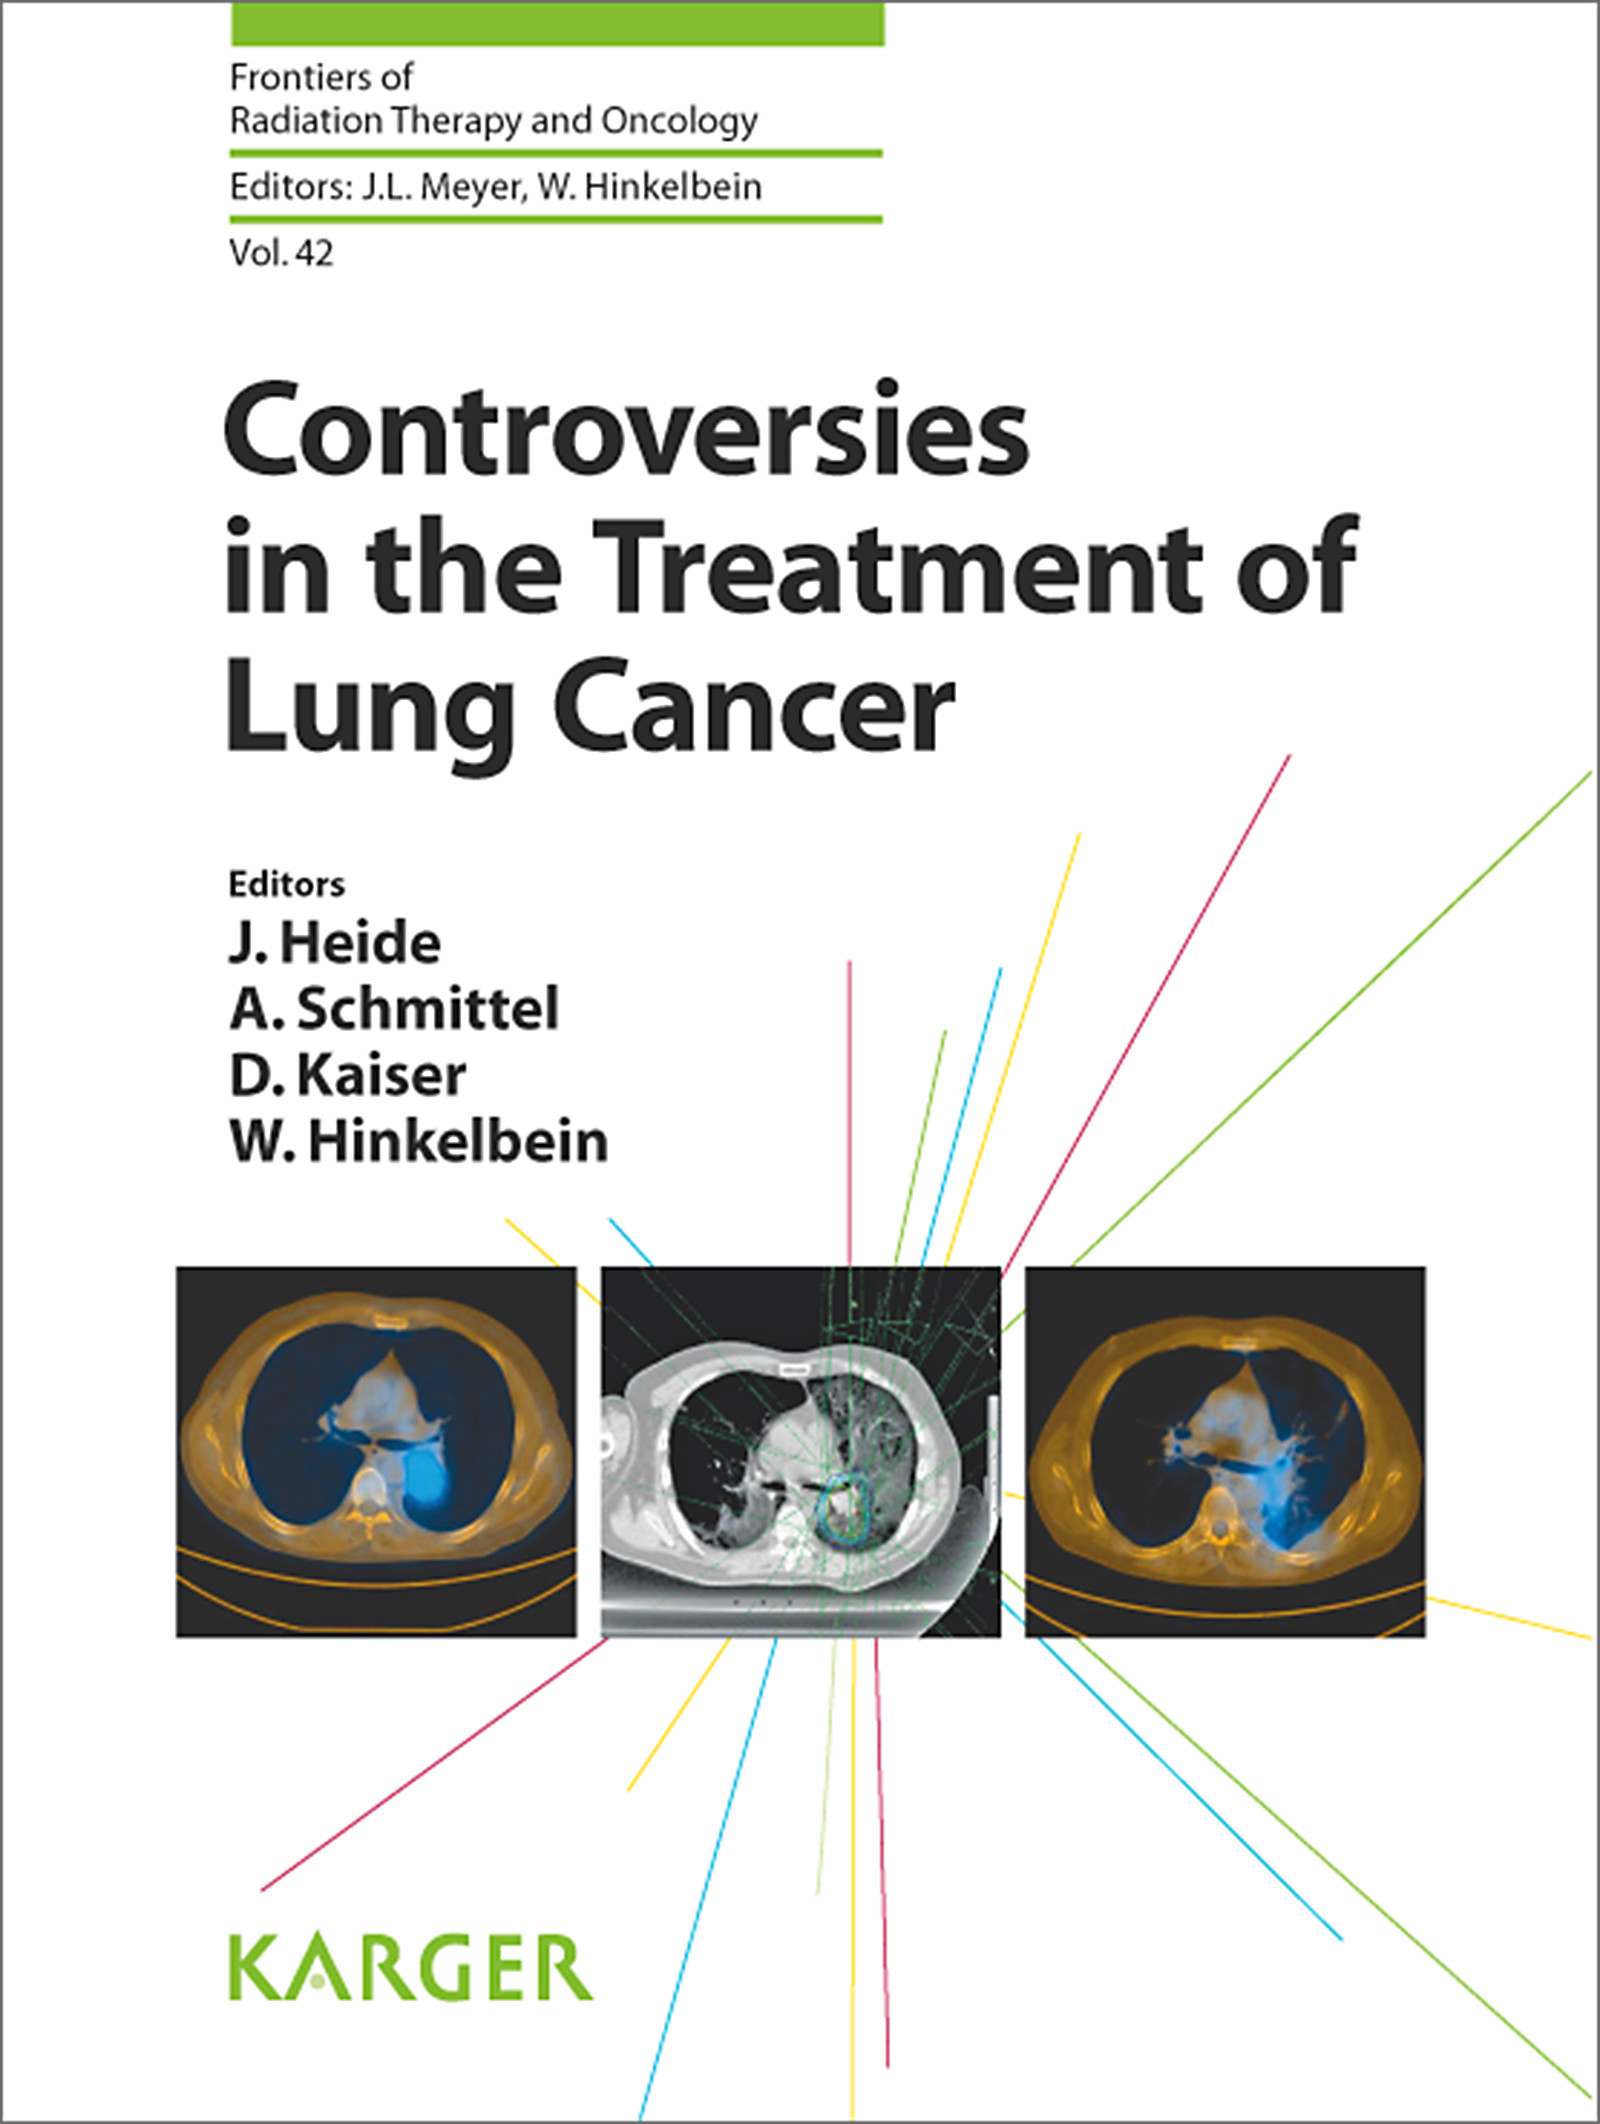 Controversies in the Treatment of Lung Cancer